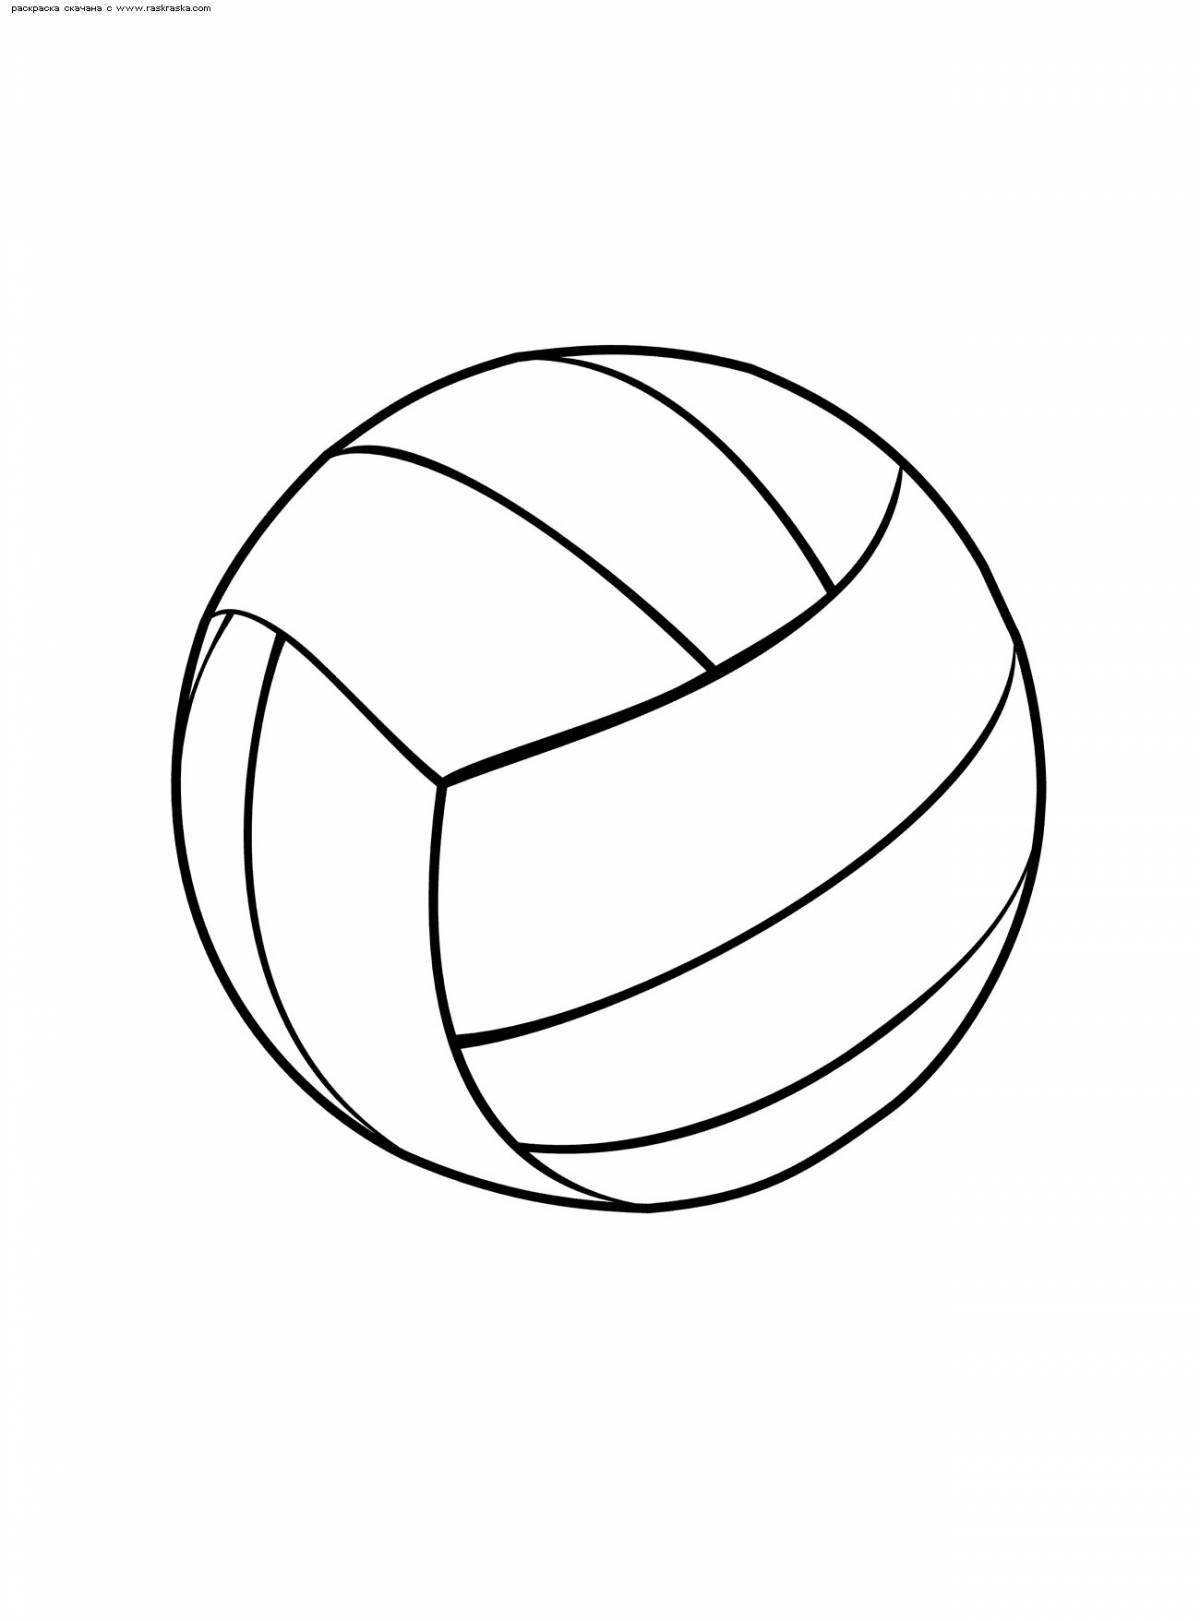 Glowing sports equipment coloring page